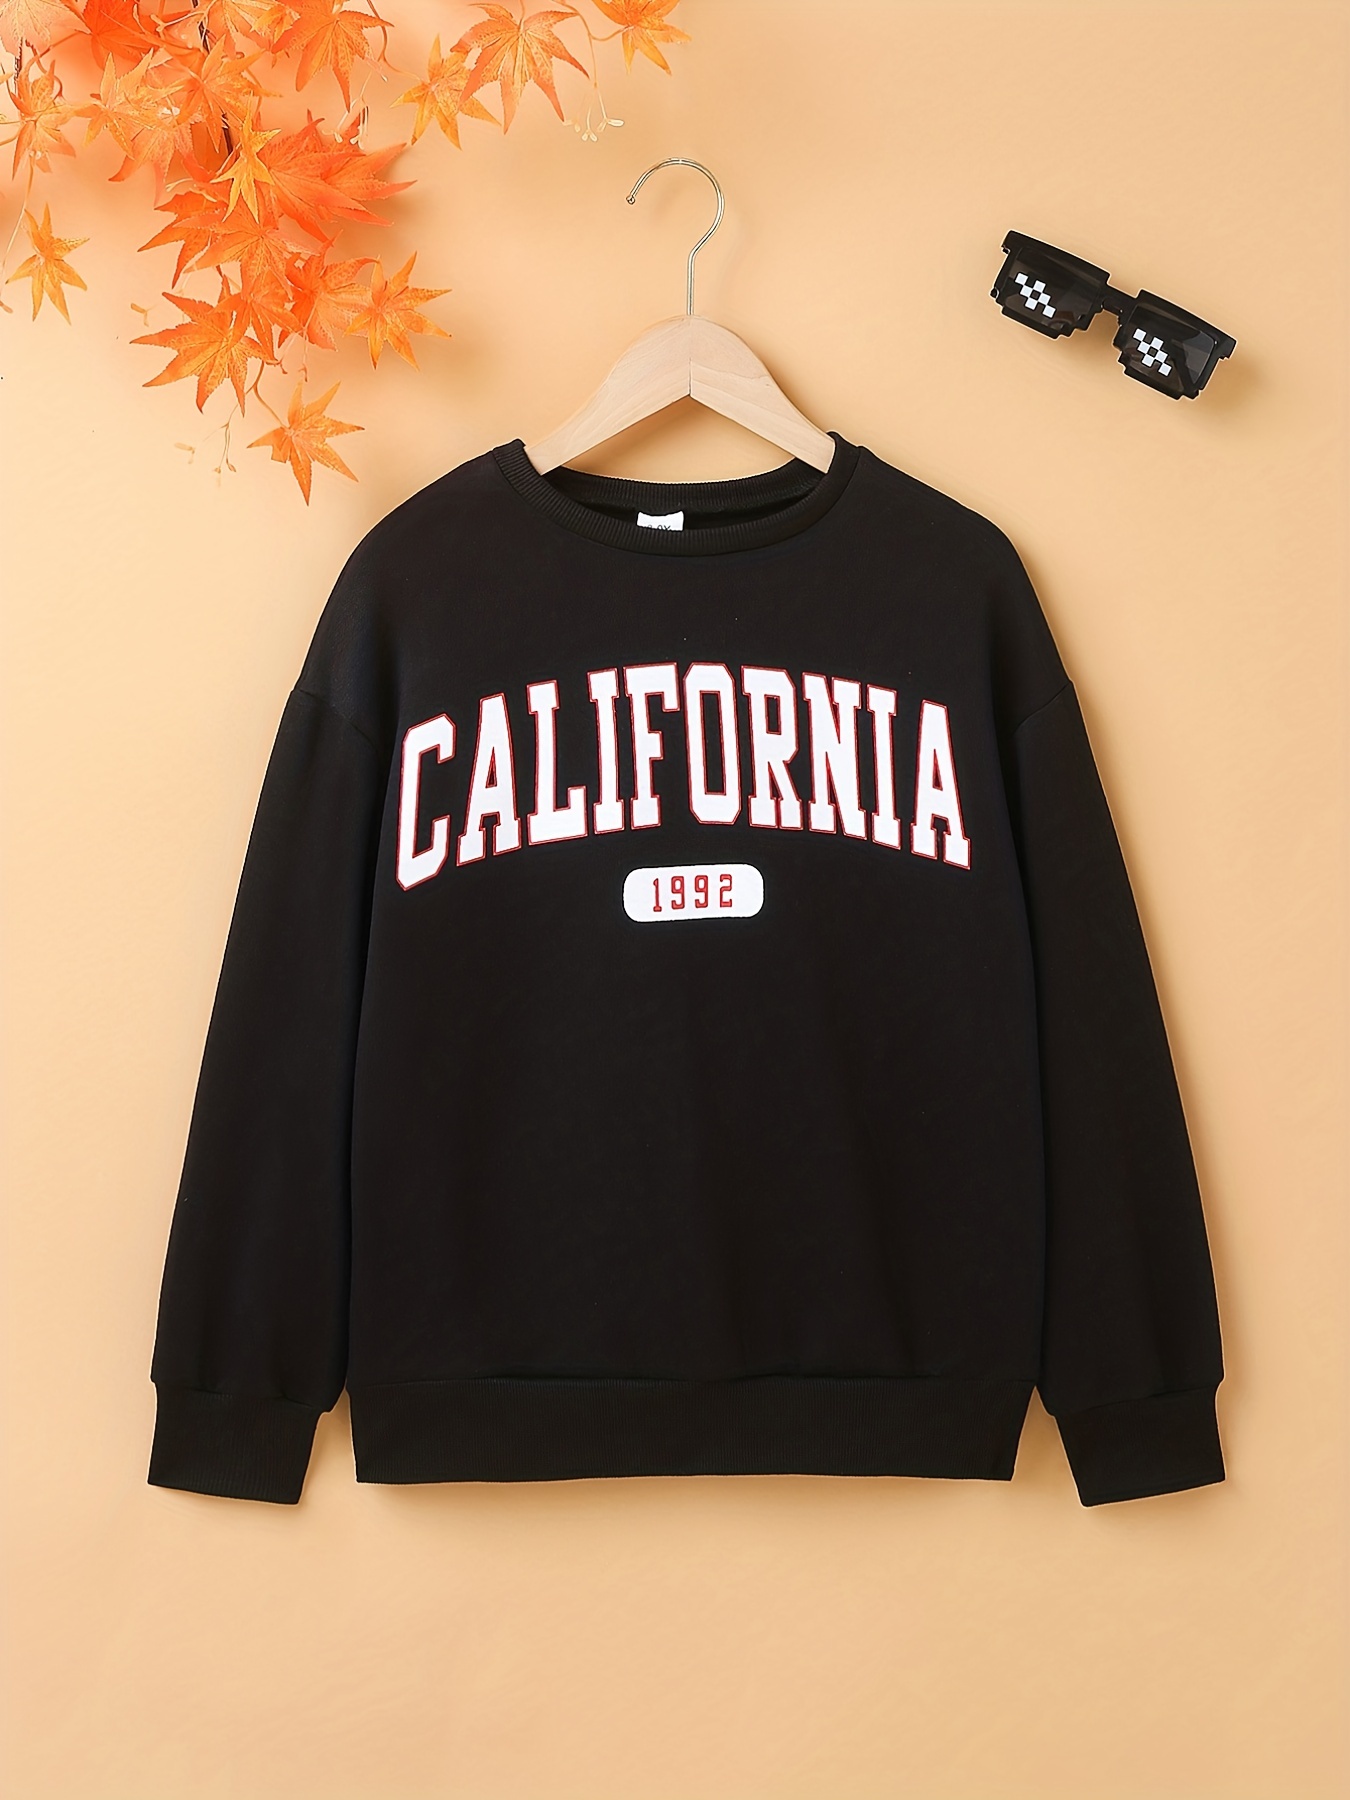 California Sweatshirts For Teen Girls Round Neck Letter Graphic Oversize  Pullover Comfy Casual Pullover Fall Winter Clothes